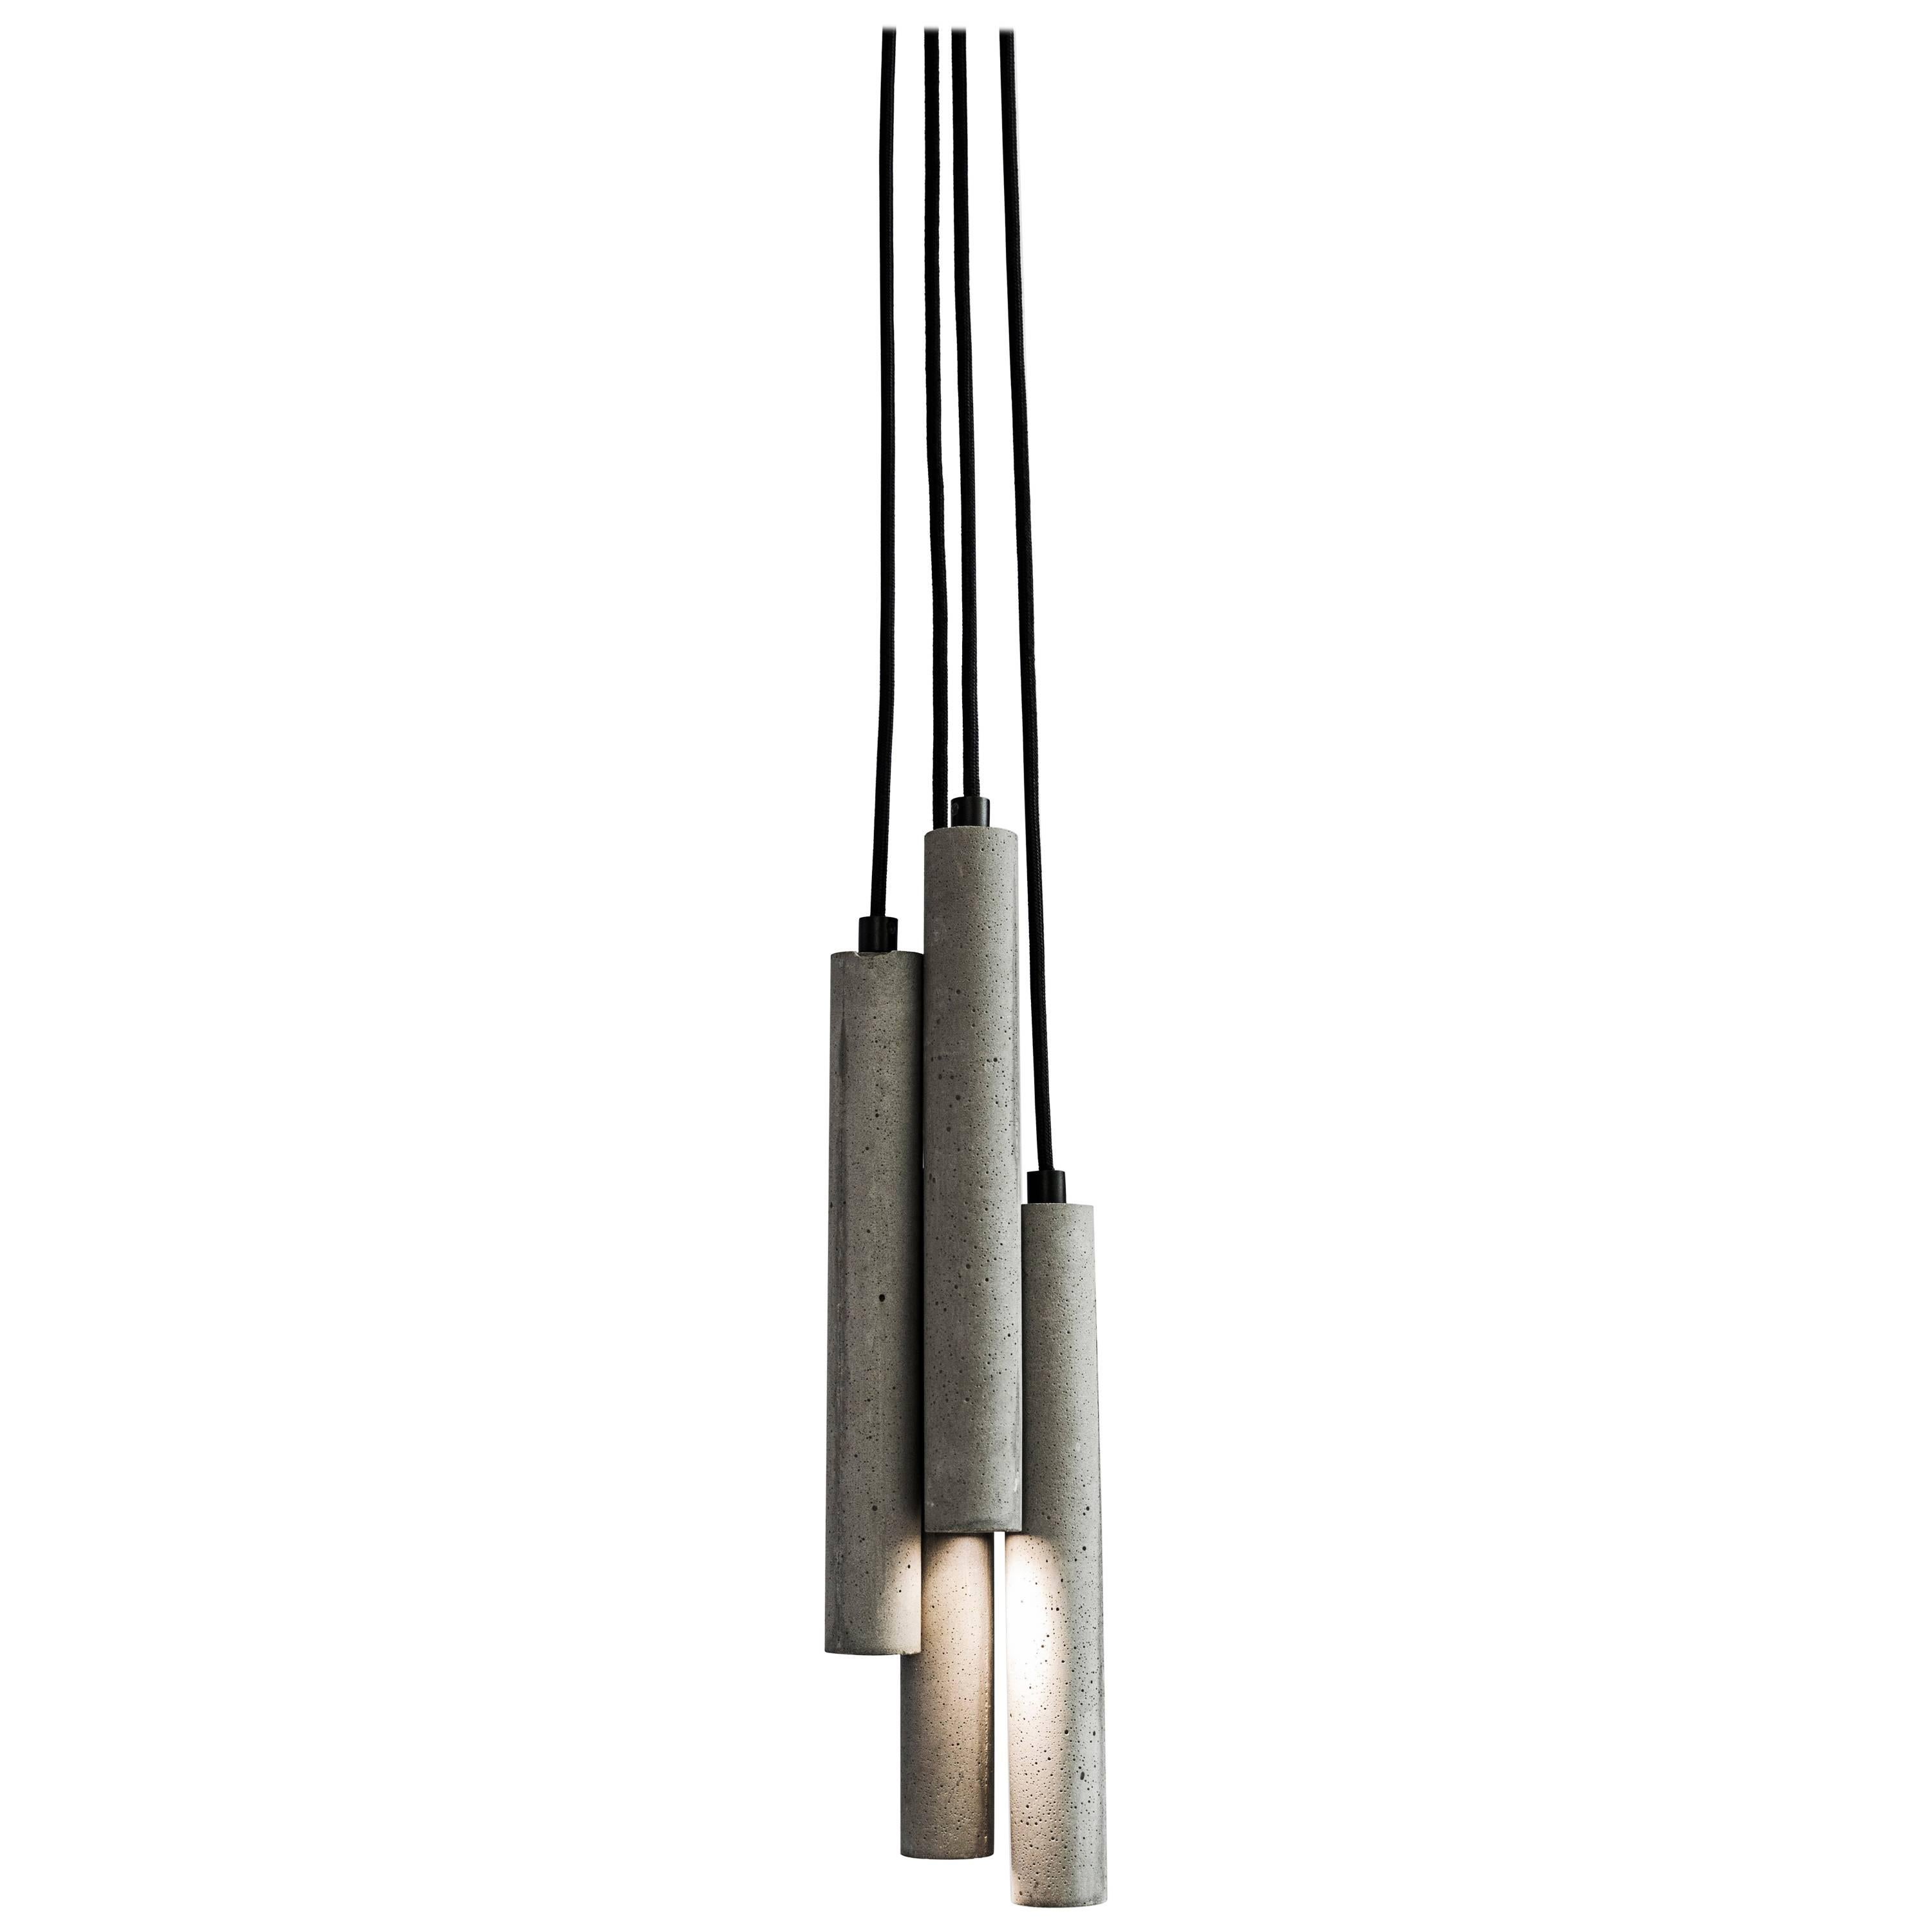 Concrete ceiling lamp designed by Cantonese studio Bentu Design.

(Sold individually)

Measures: 31 cm High; 4 cm Diameter
Wire: 2Meters Black (adjustable)
Lamp Type: G9 LED 2W 100-240V 80Ra 135LM 3000K (compatible with US electric